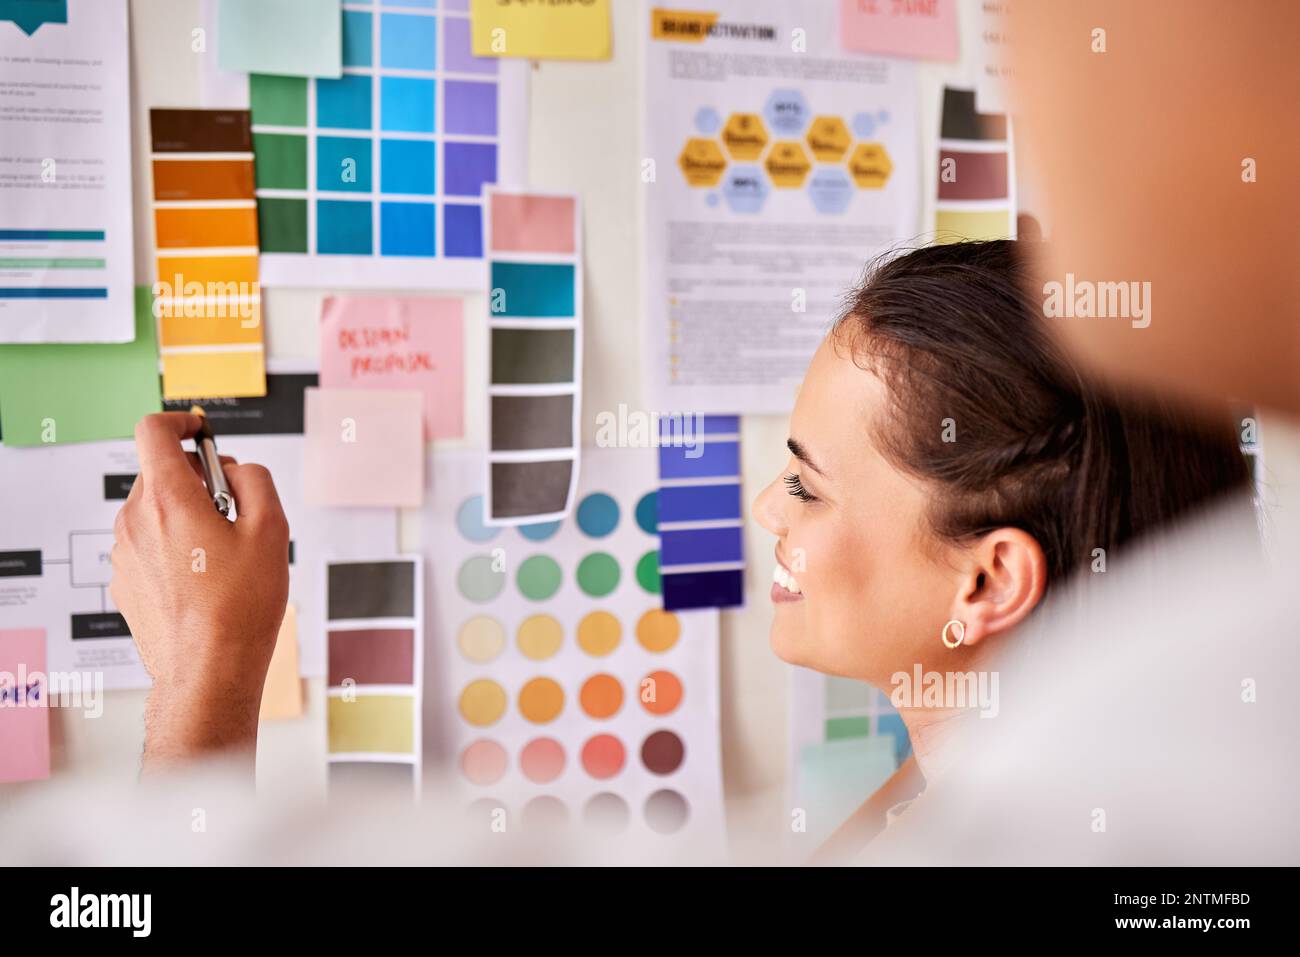 Designer, color palette and people planning creative project, brand development or b2b collaboration advice. Ideas brainstorming on moodboard of Stock Photo